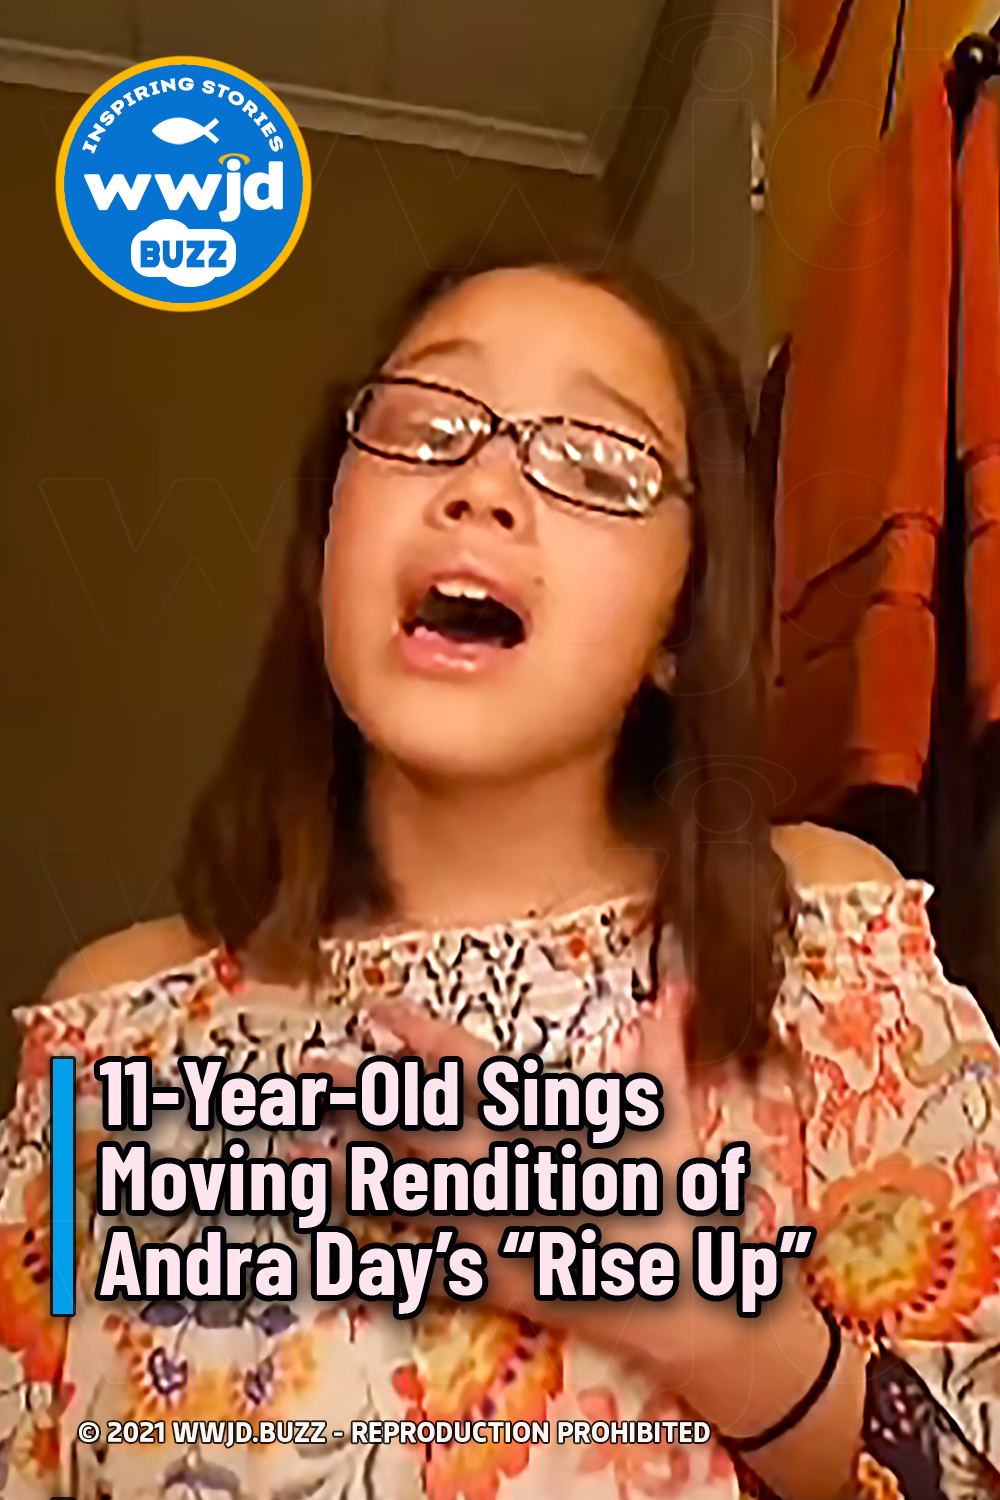 11-Year-Old Sings Moving Rendition of Andra Day’s “Rise Up”